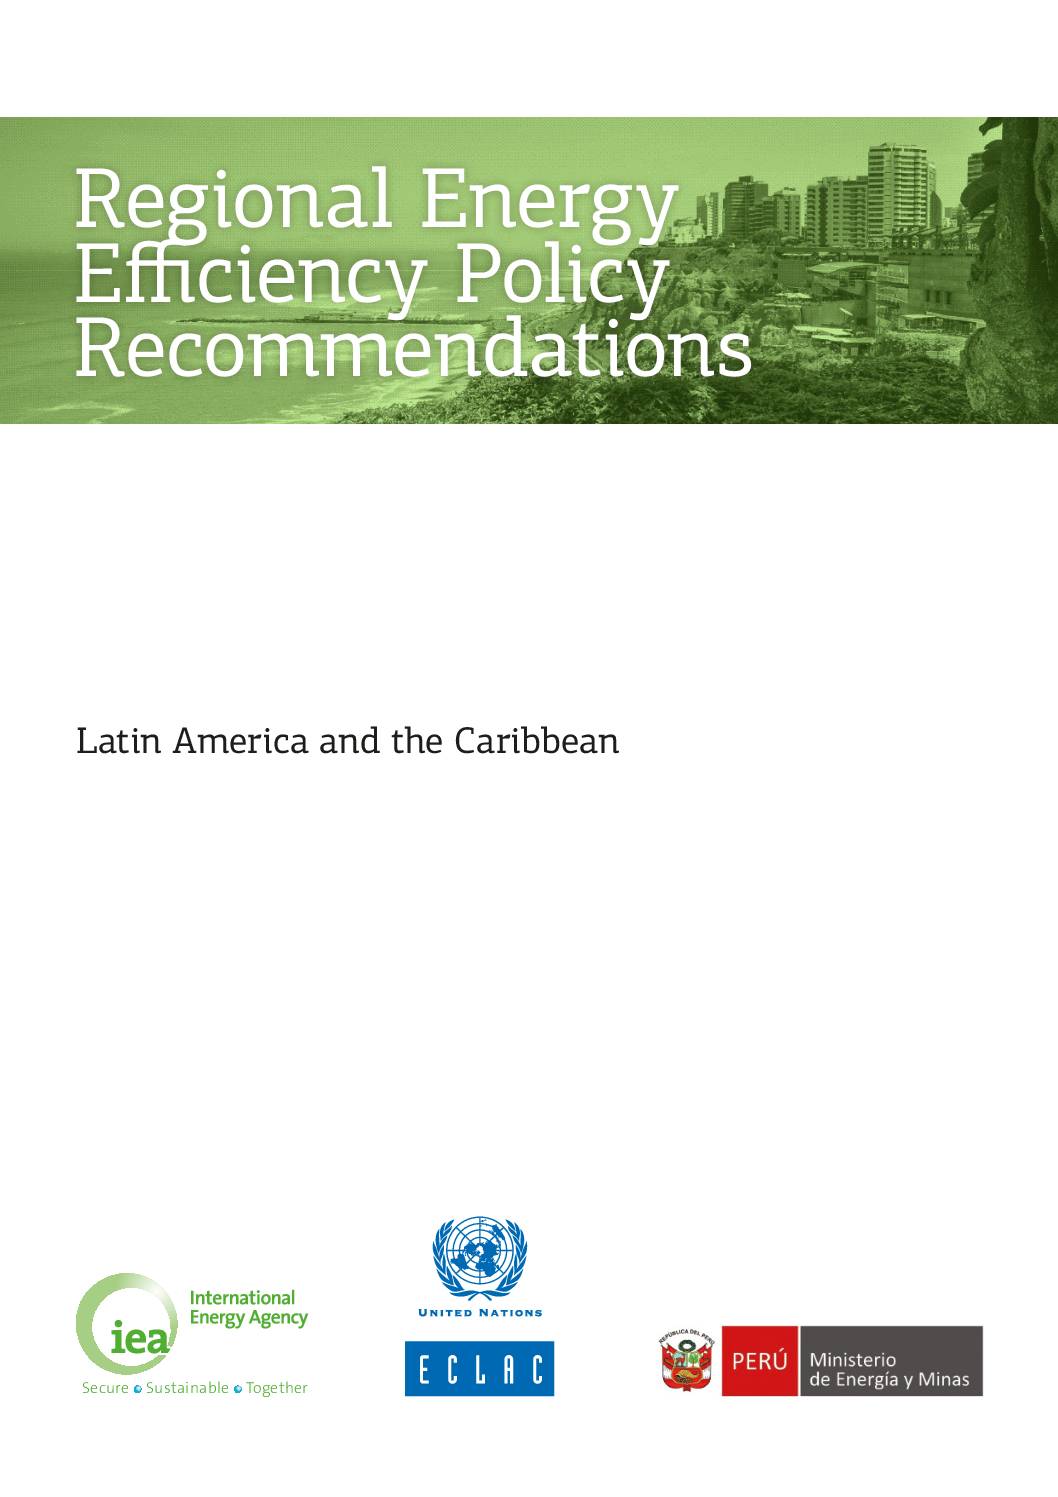 Regional Energy Efficiency Policy Recommendations: Latin America and the Caribbean